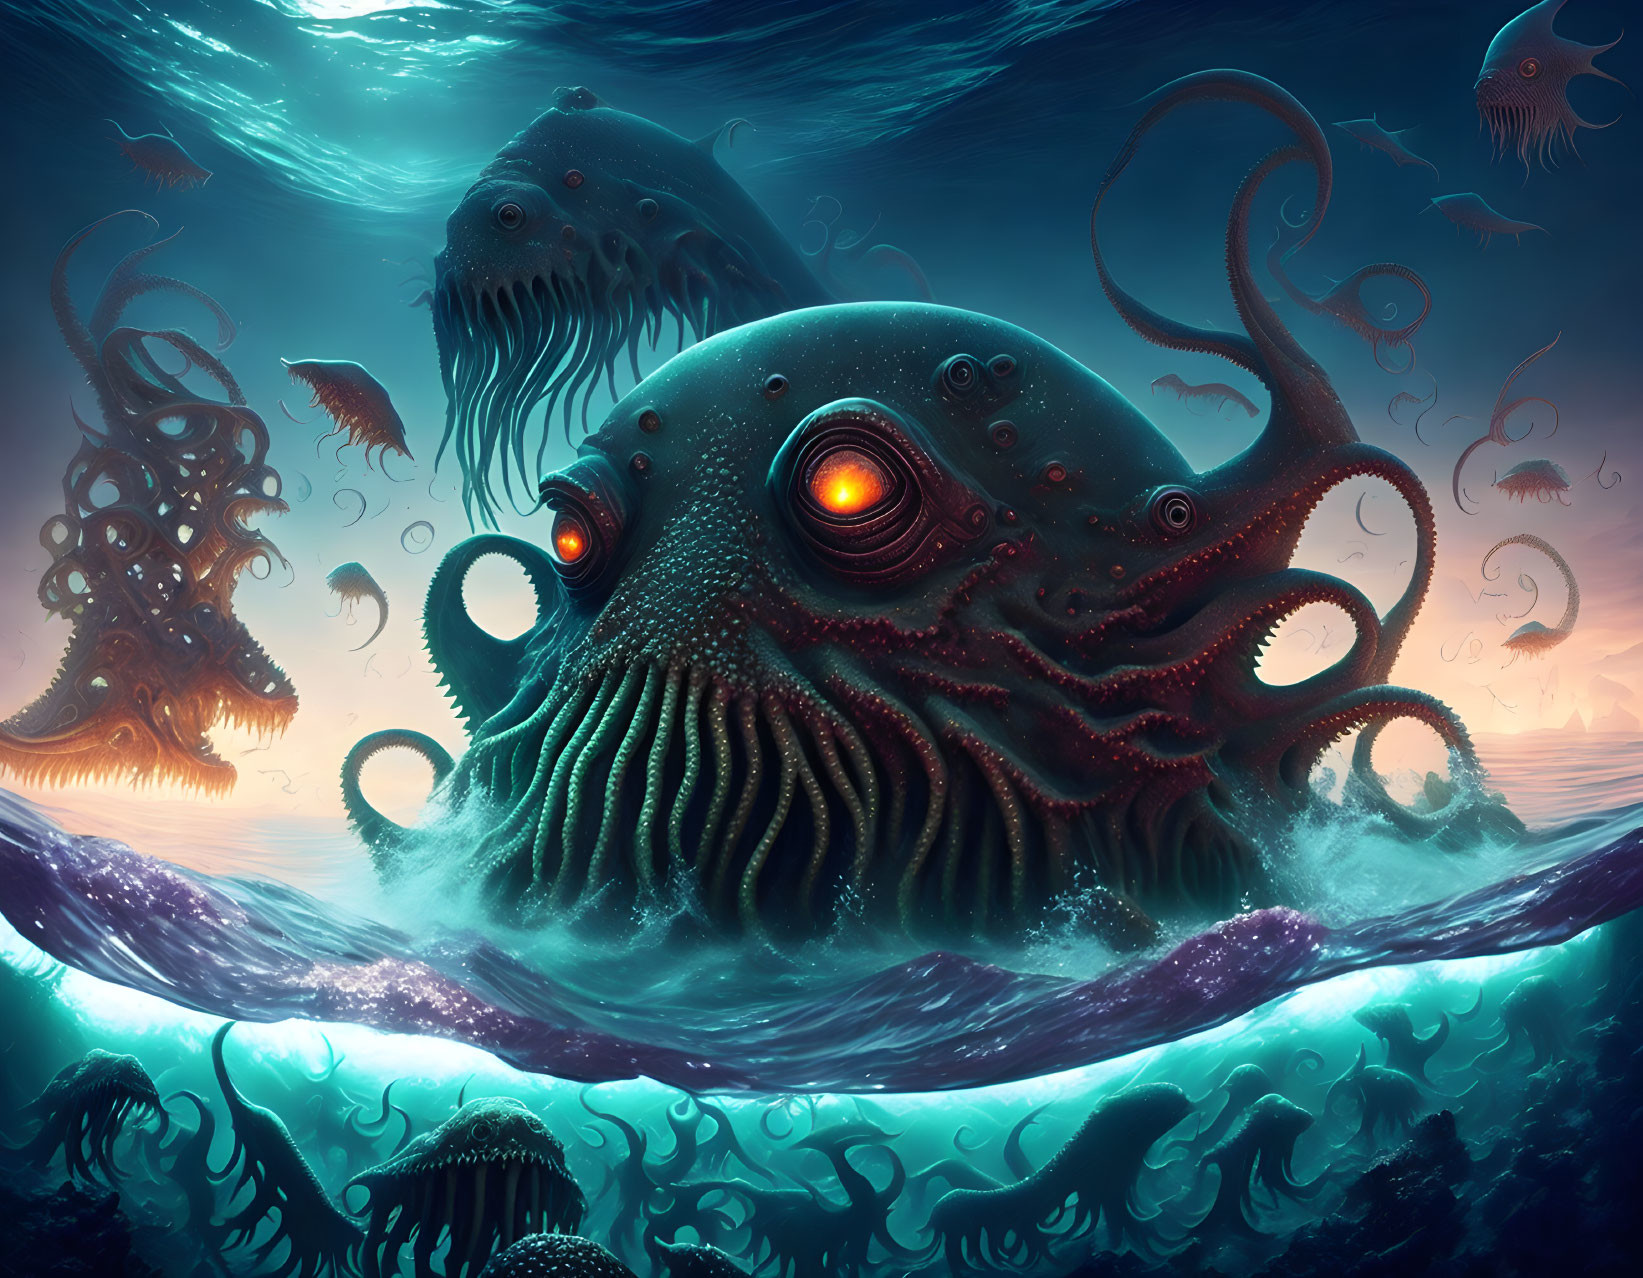 Giant octopus with glowing eyes in ocean depths surrounded by jellyfish-like creatures